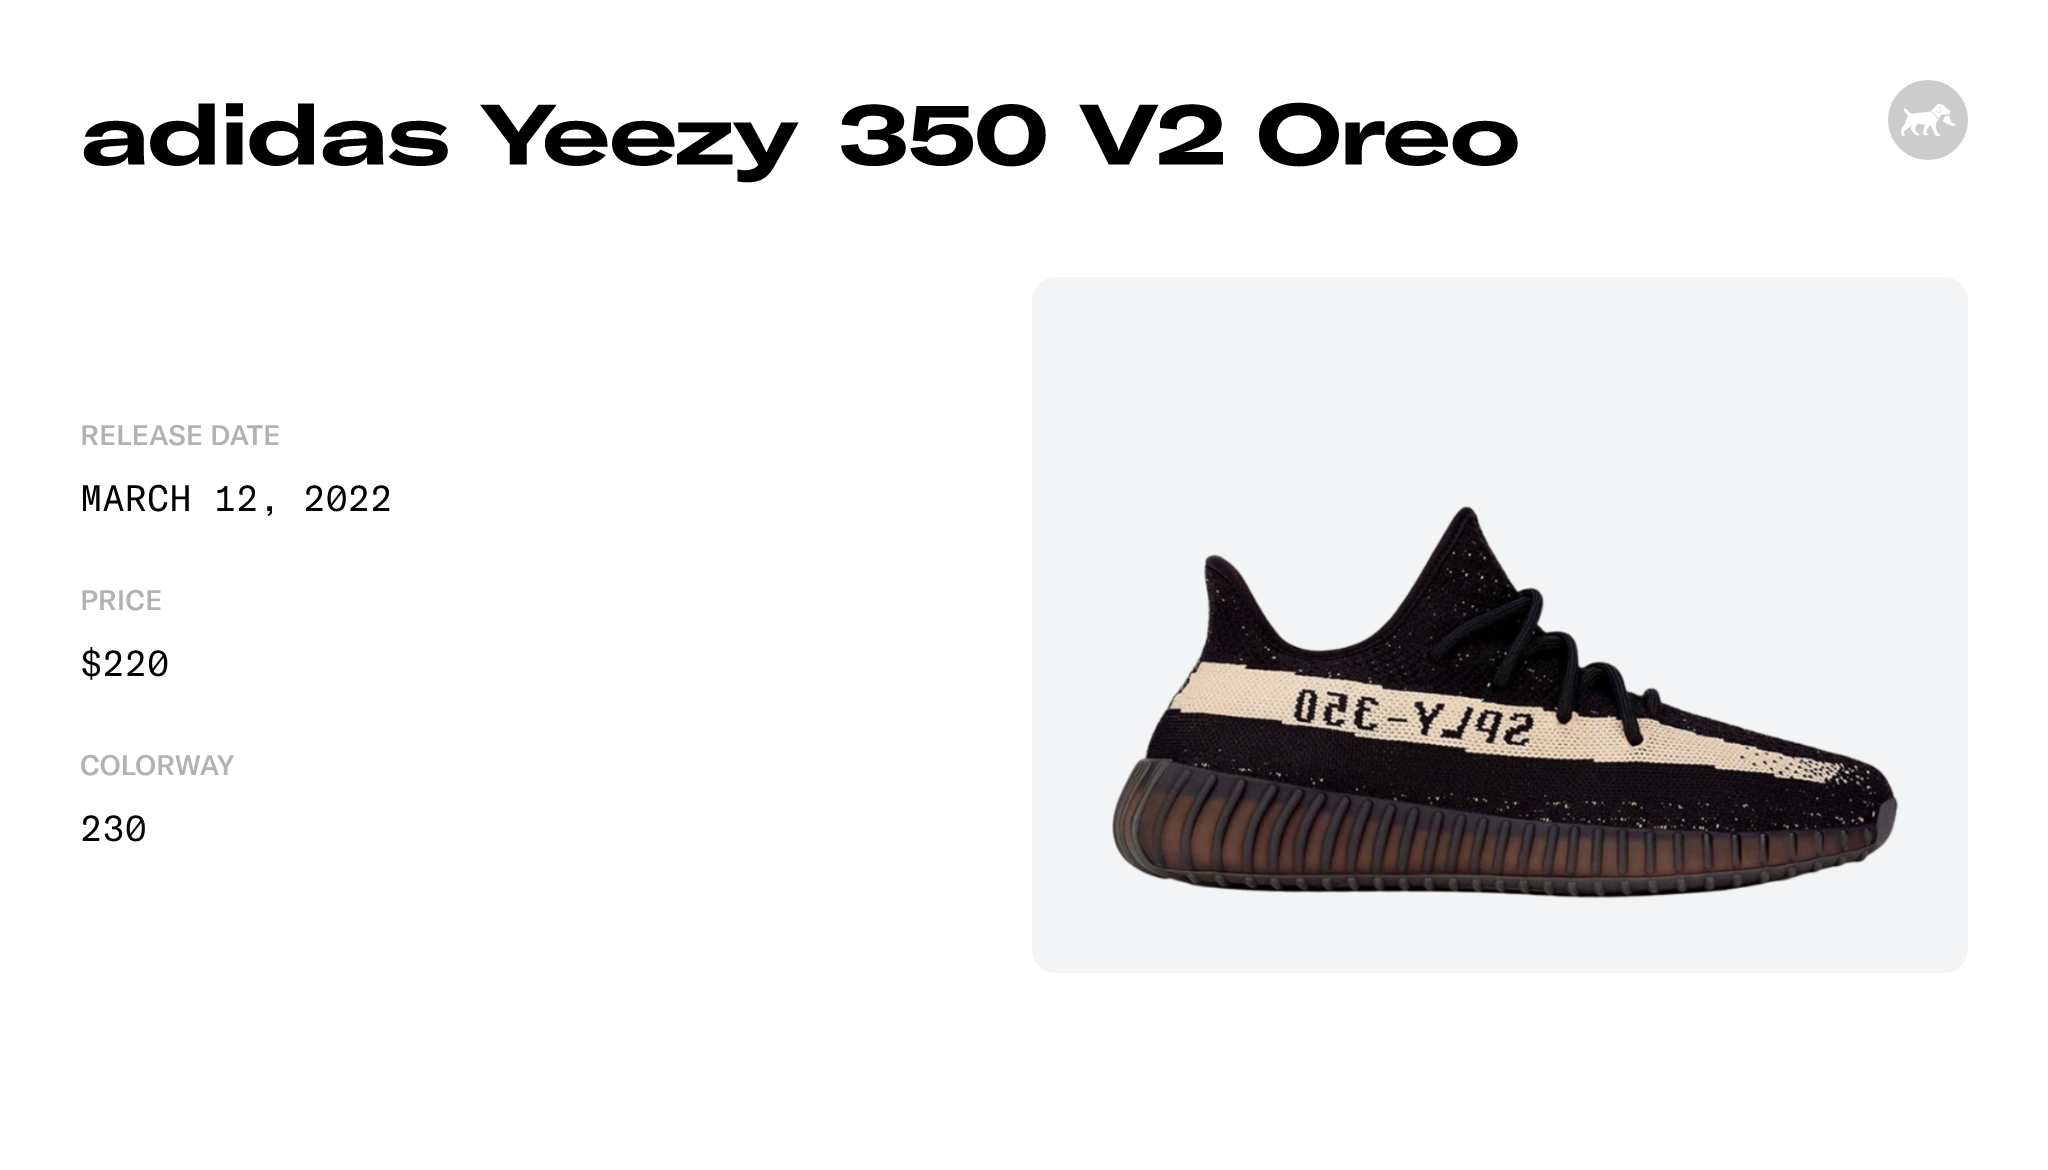 ADIDAS YEEZY BOOST 350 V2 TRAINERS in BLACK & WHITE OREO SHOES